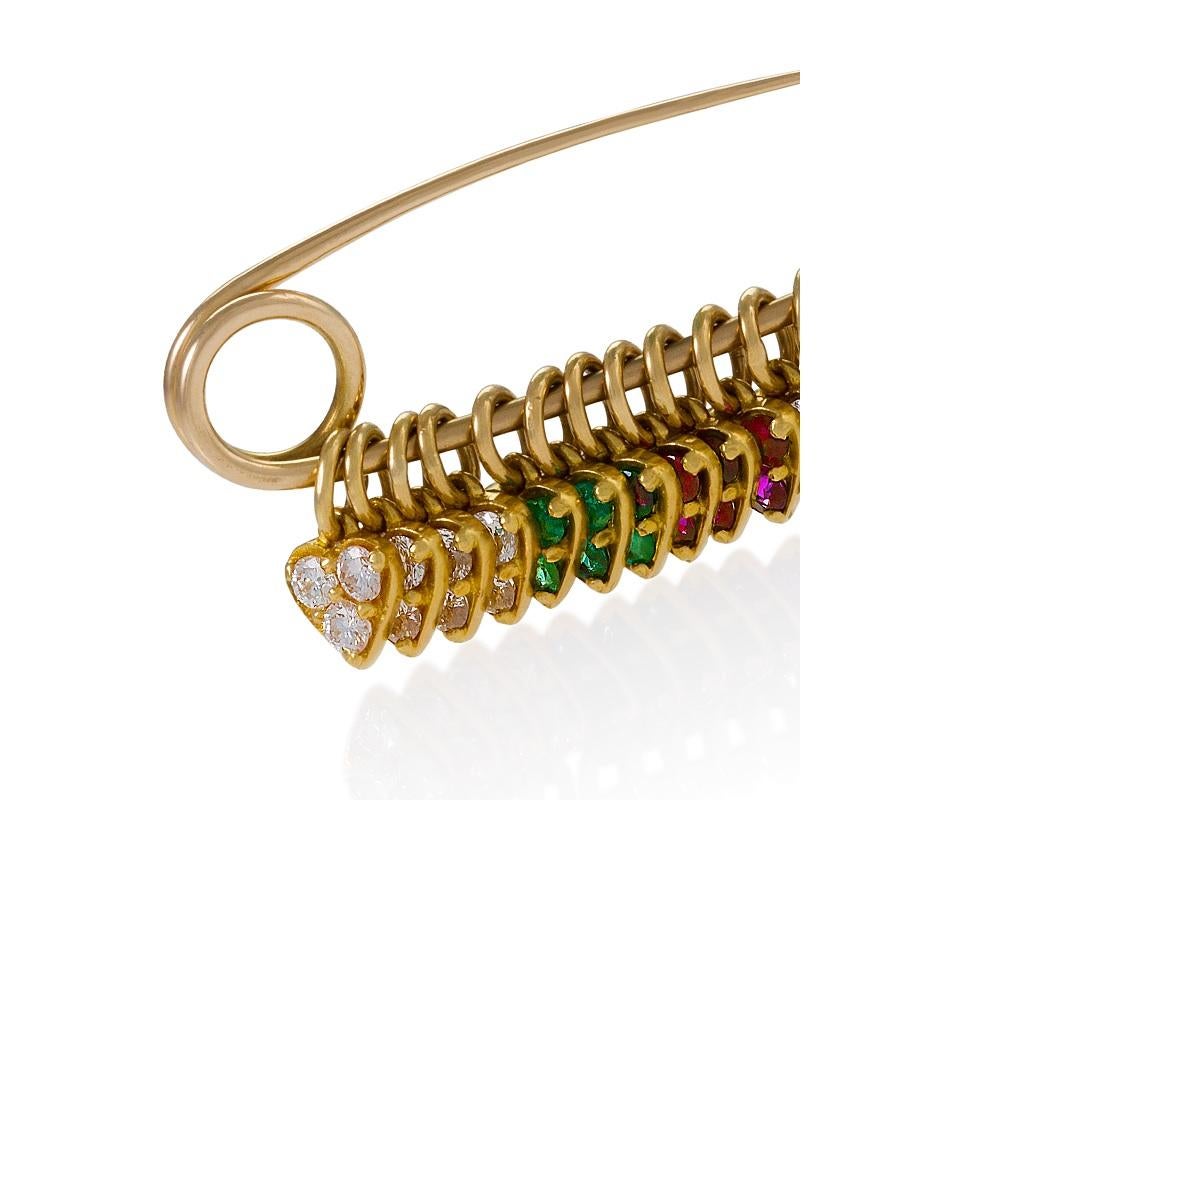 An American modern safety pin brooch in 14 and 18 karat bi-color gold with diamonds, rubies and emeralds. The 14 karat bi-color gold safety pin, suspending fourteen 18 karat gold gem-set and diamond hearts, has 36 round brilliant-cut diamonds, with